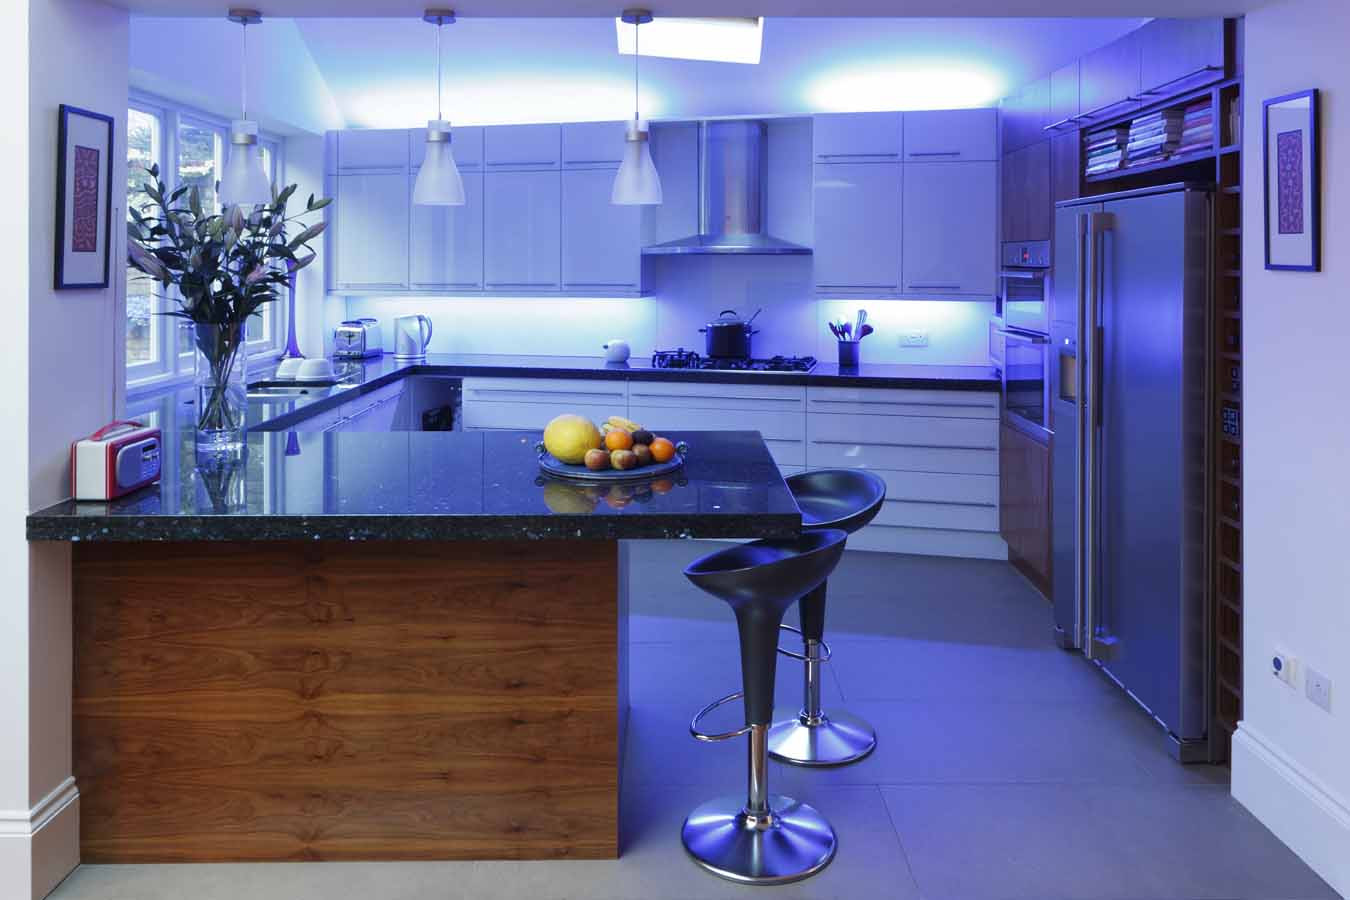 led light in kitchen not working